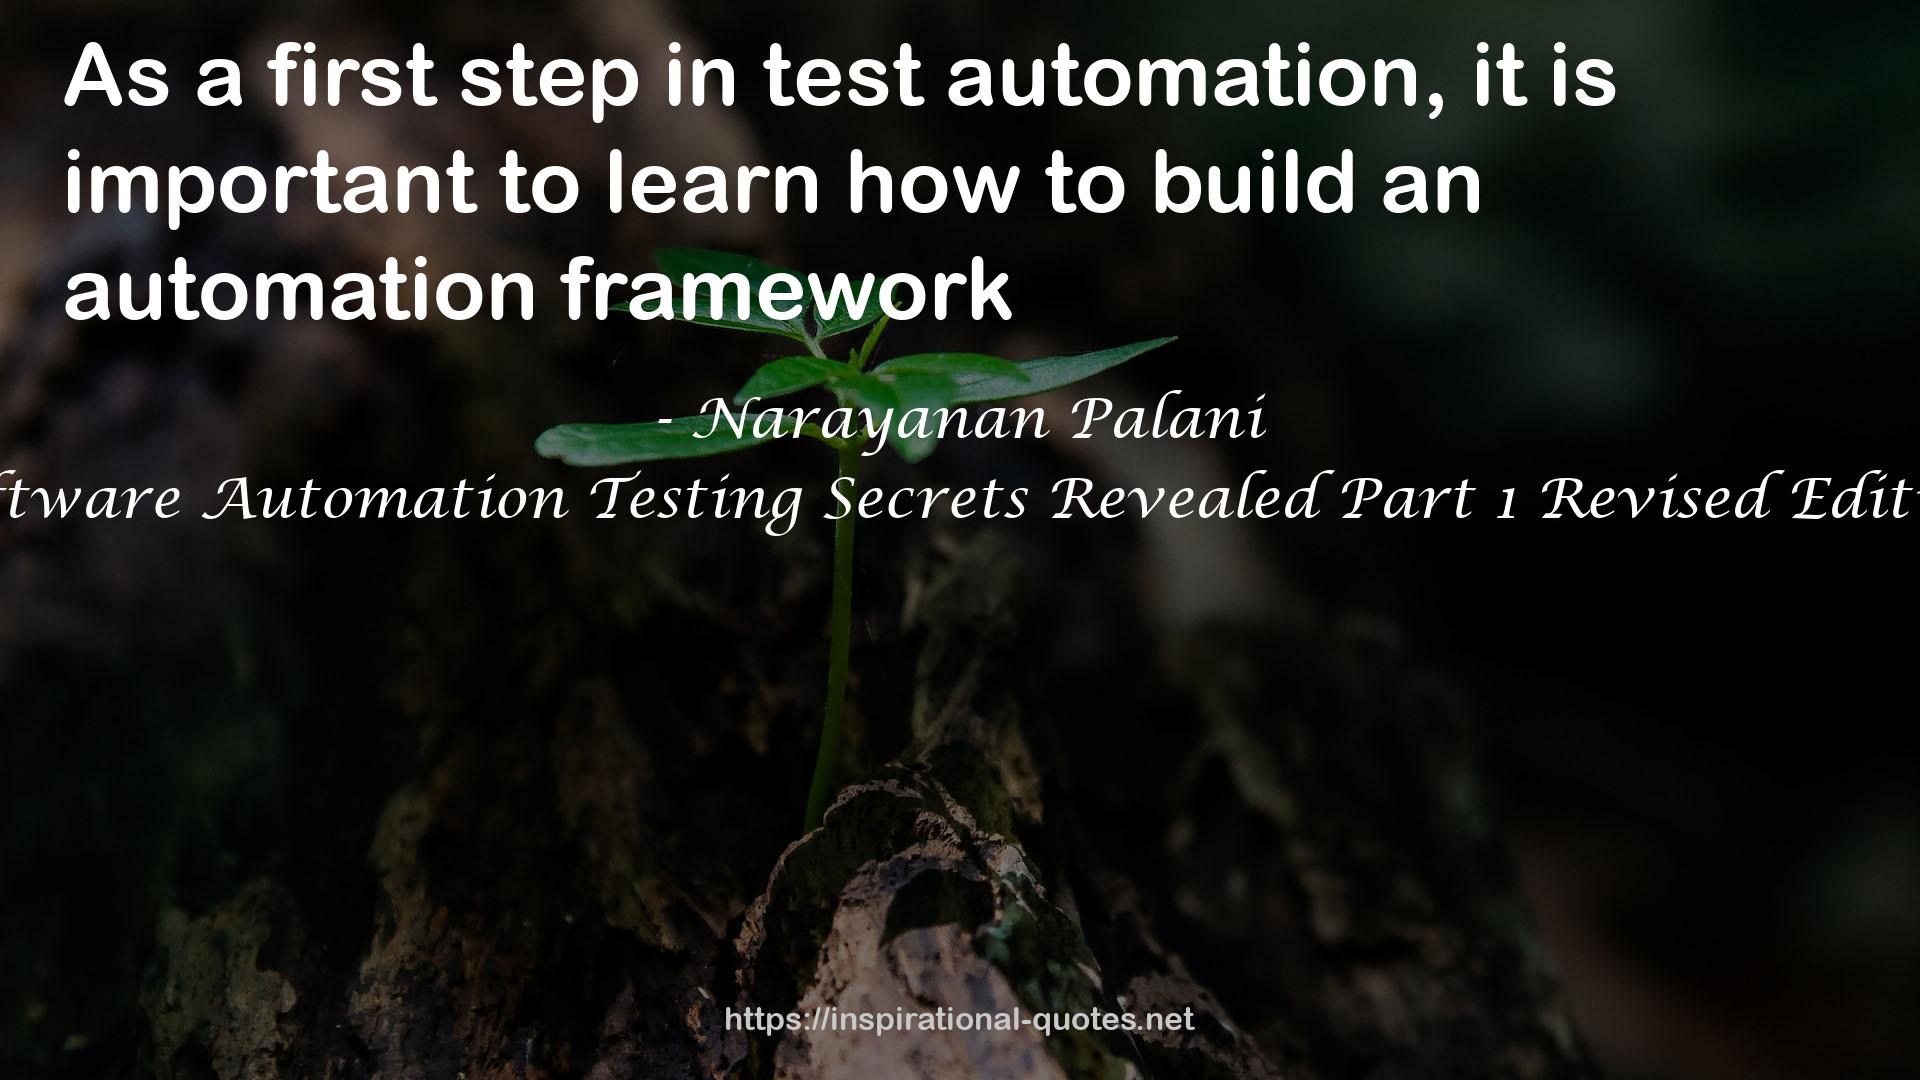 Software Automation Testing Secrets Revealed Part 1 Revised Edition QUOTES